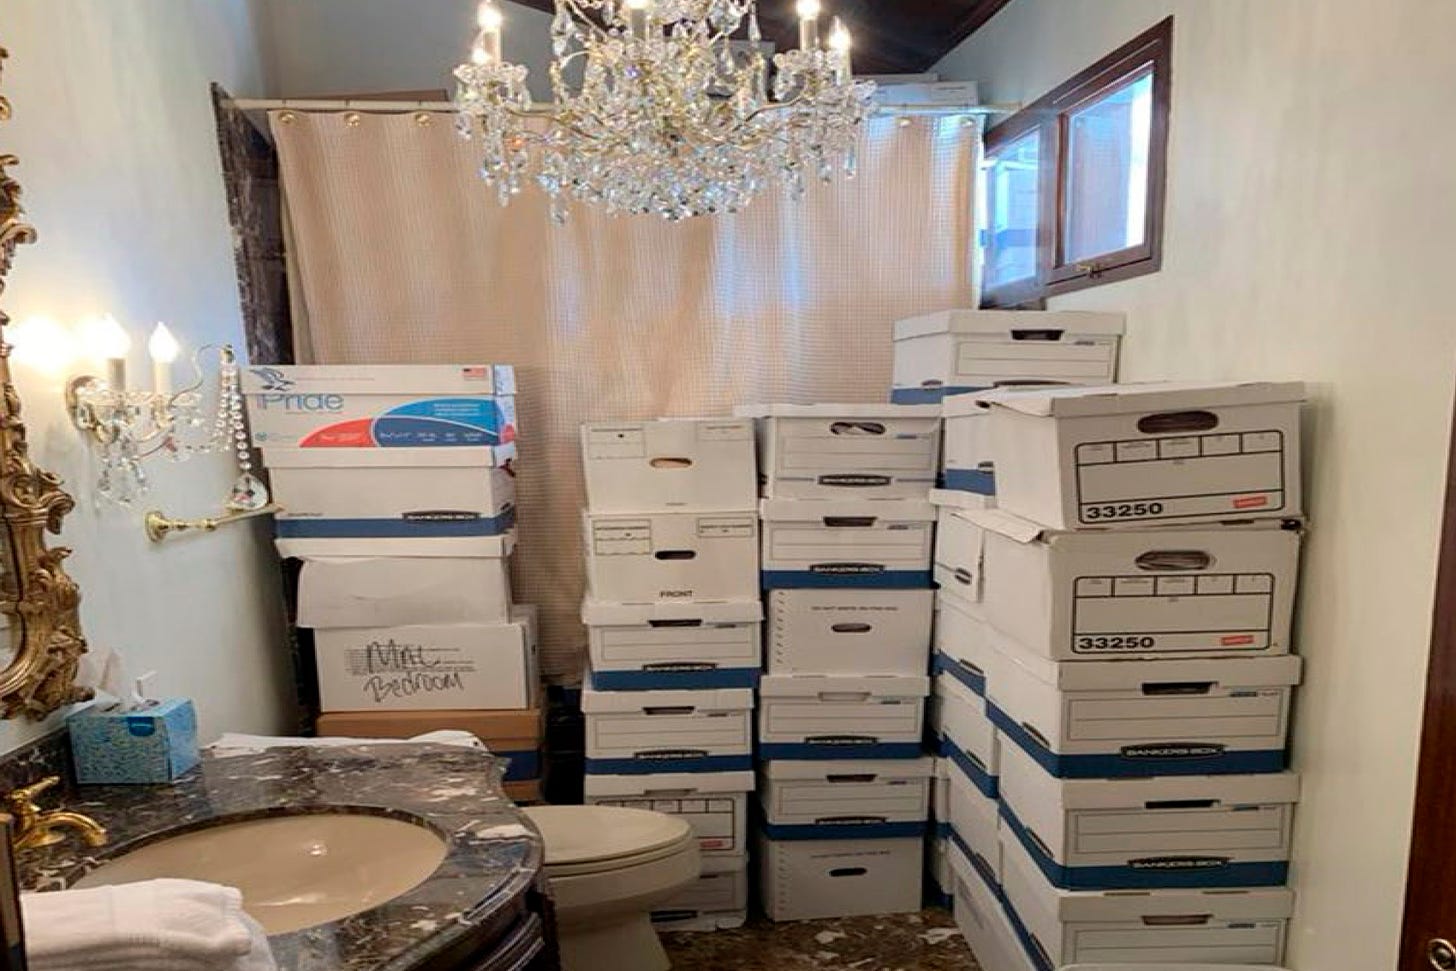 Boxes of records stored in a bathroom and shower in the Lake Room at Trump's Mar-a-Lago estate in Palm Beach, Fla.